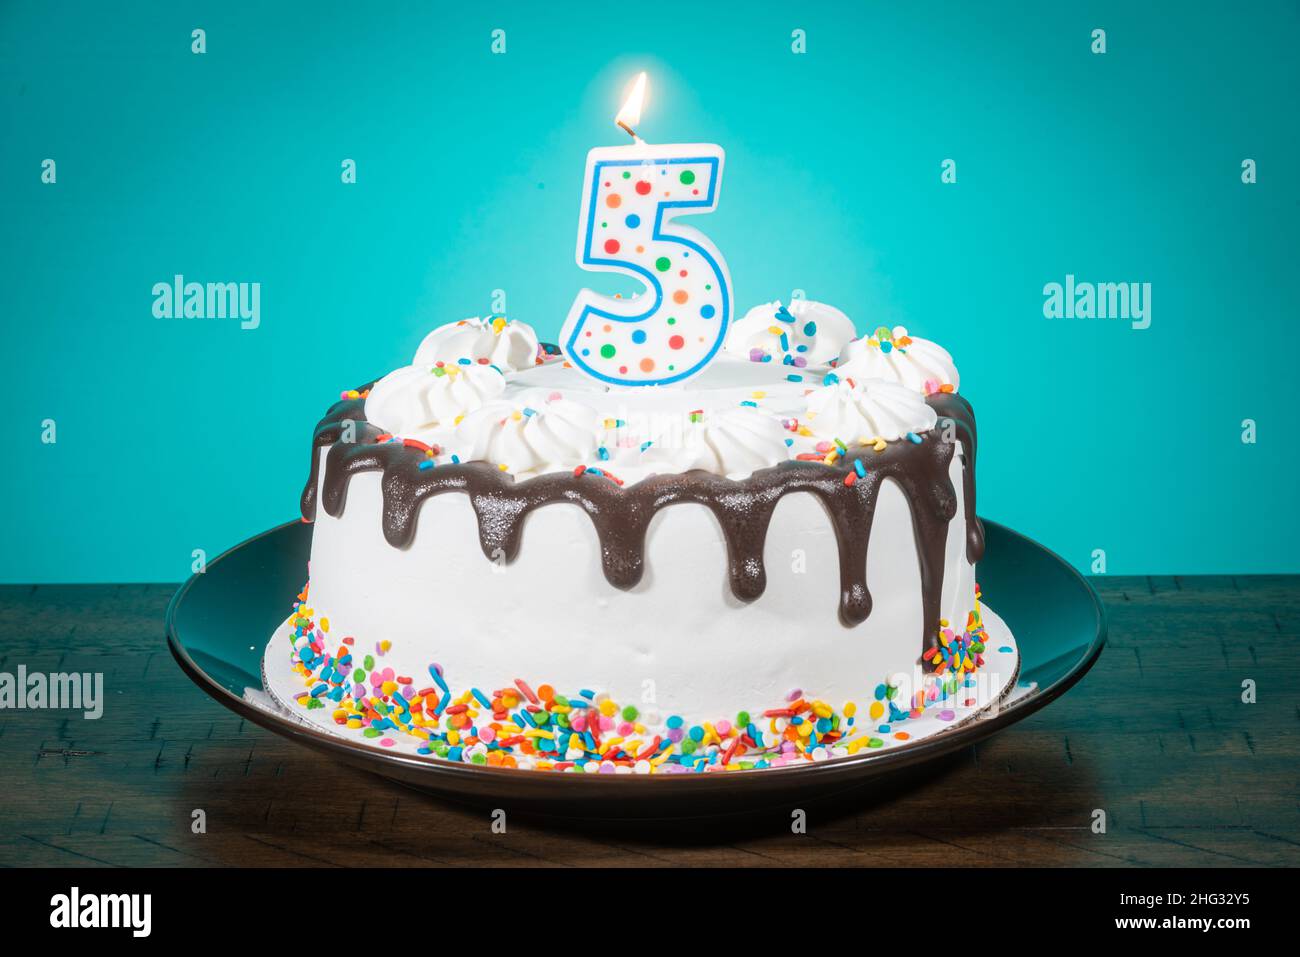 A birthday cake bears a candle in the shape of the number 5. Stock Photo